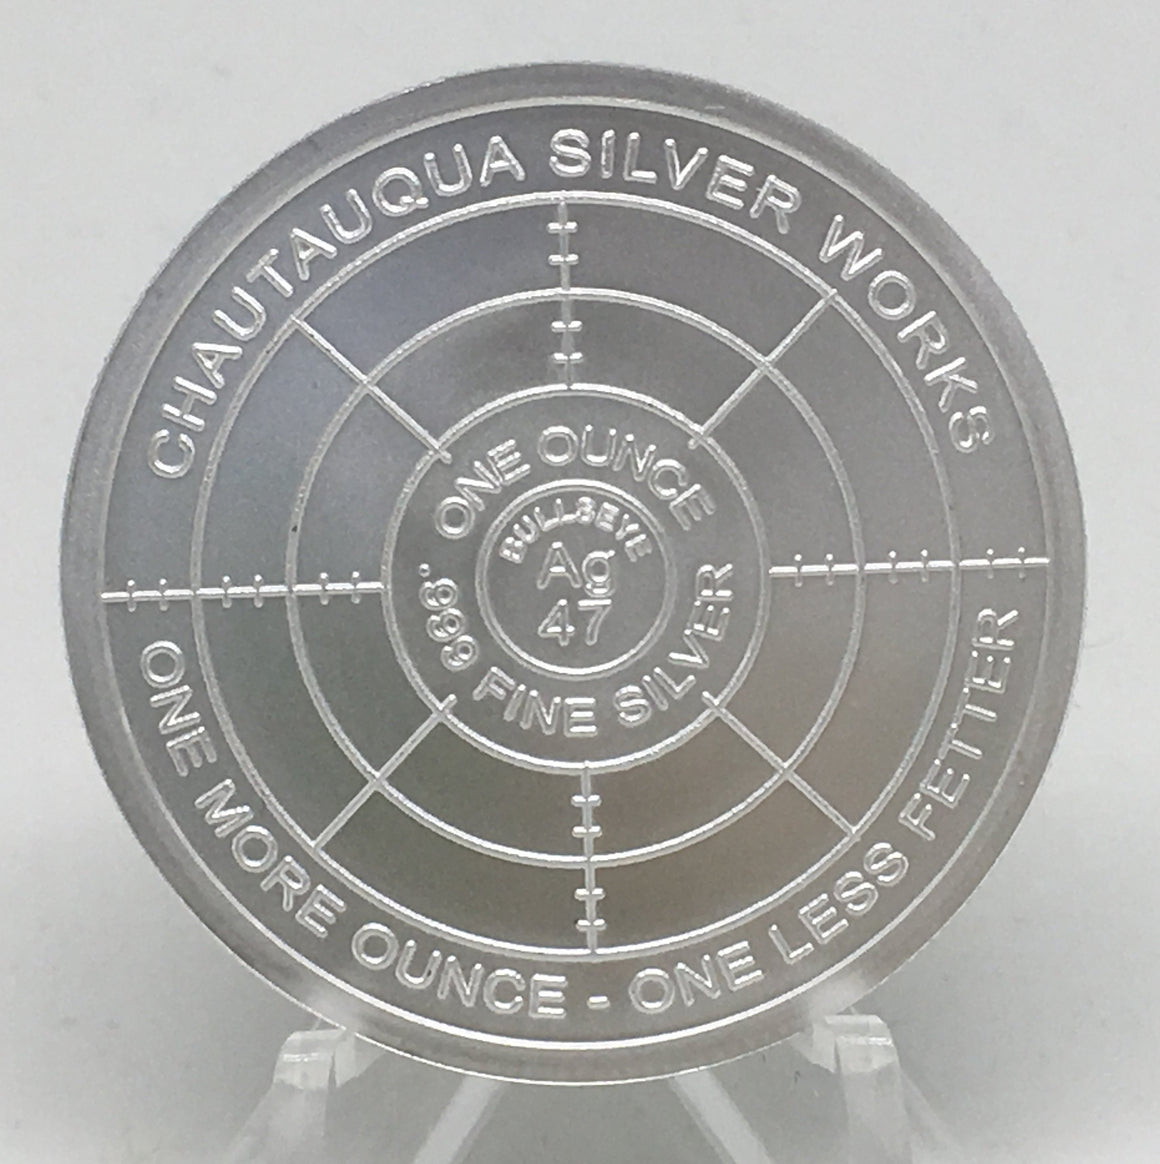 Cryptic Silver Series #6 - Cryptic Forces, BU Finish by Chautauqua Silver Works, 1oz .999 Silver Round.